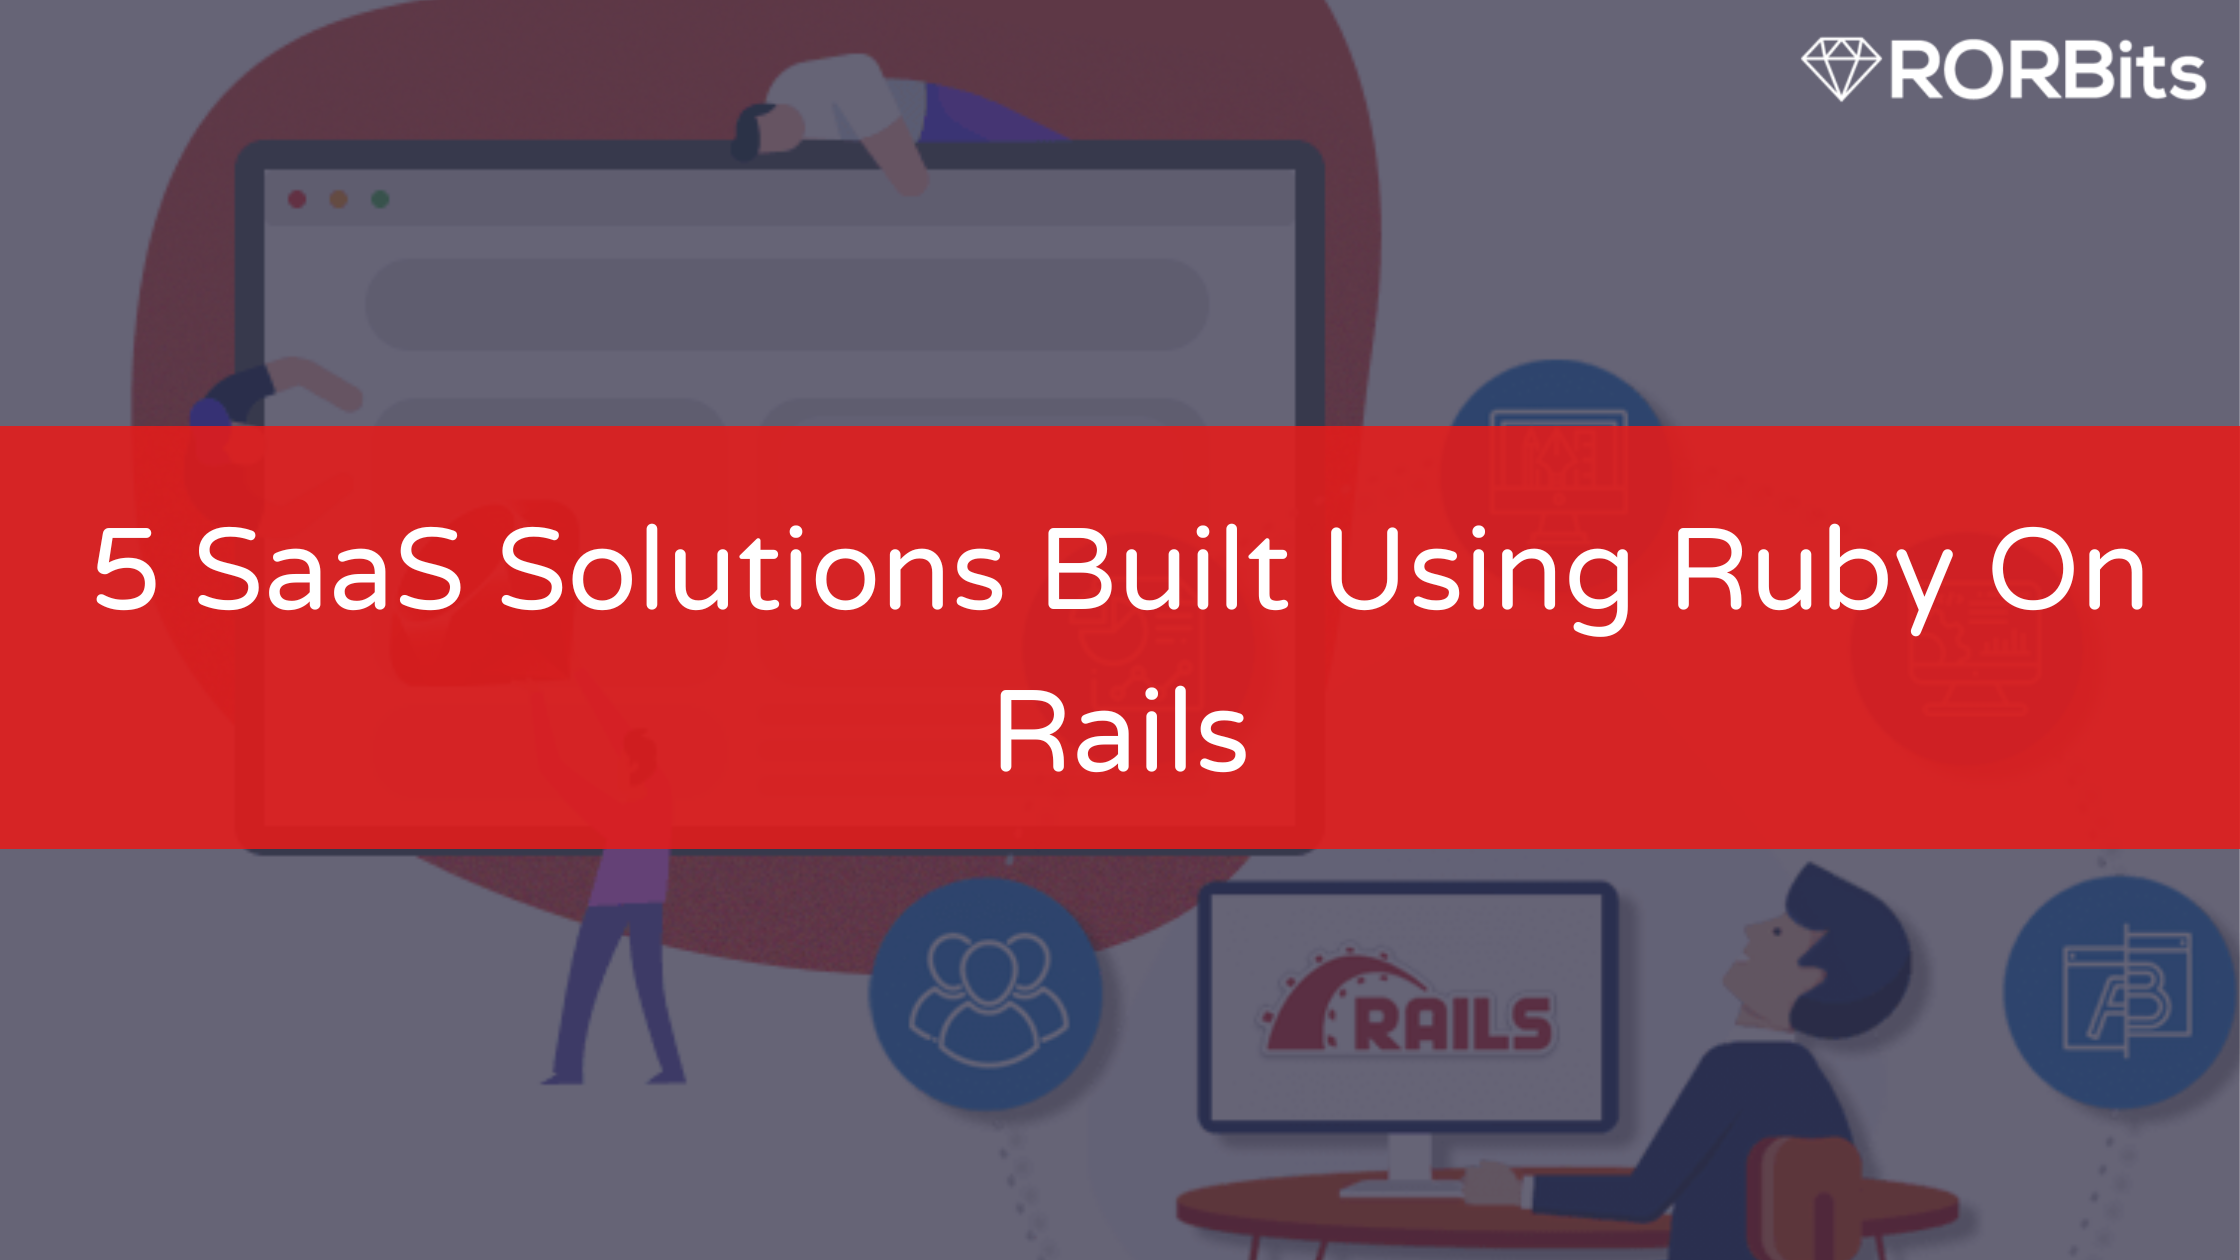 5 SaaS Solutions Built Using Ruby On Rails